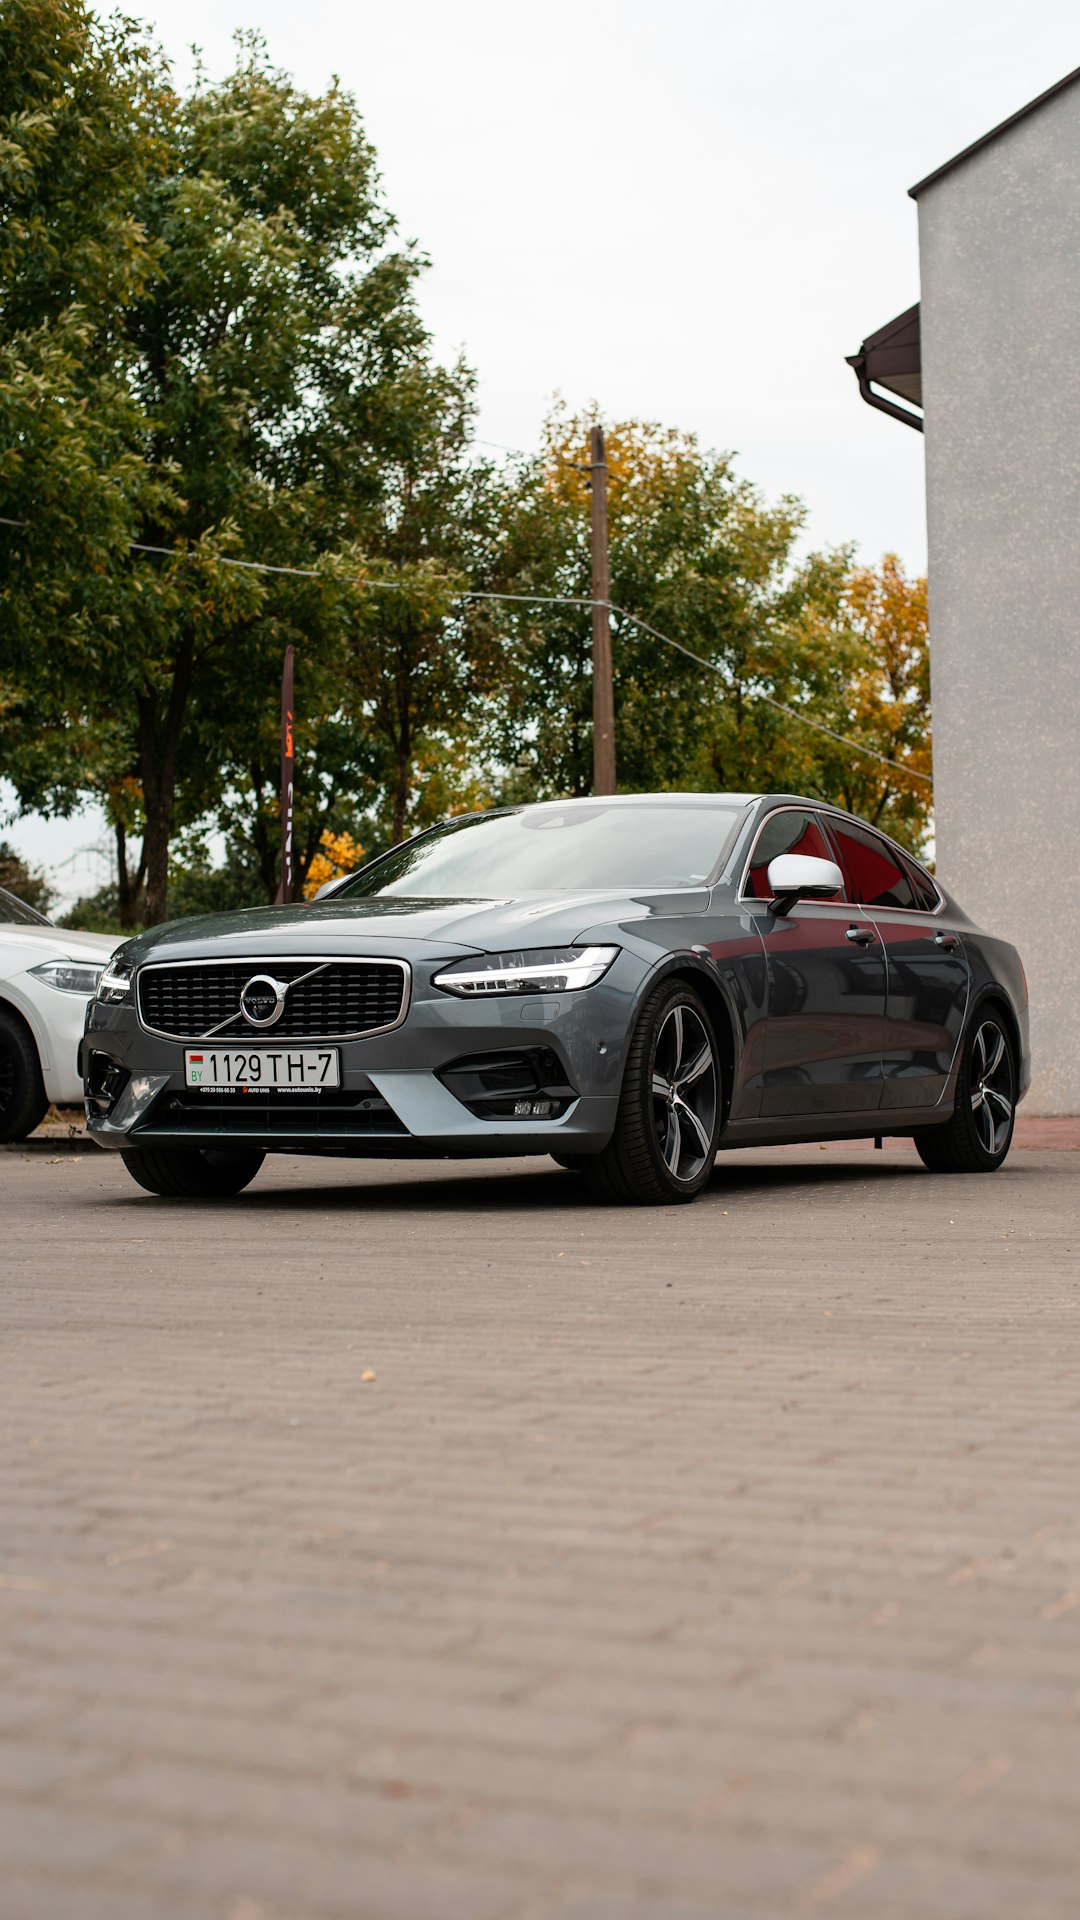 The Volvo S60 is a stylish and reliable sedan that offers a comfortable and luxurious driving experience.